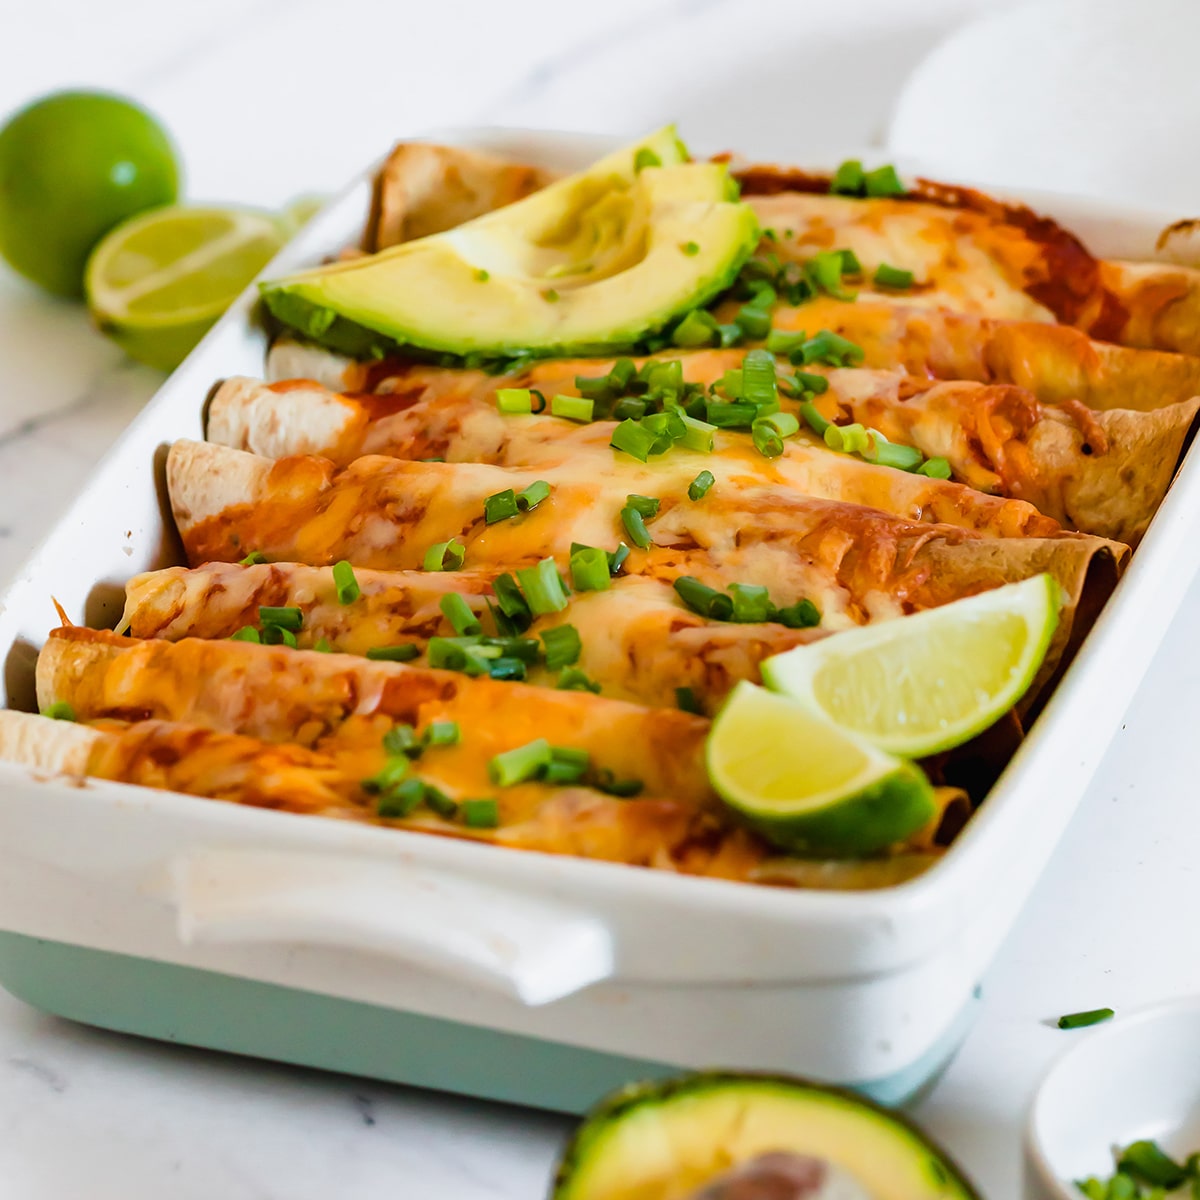 Photo of a white casserole dish filled with vegan enchiladas, and topped with fresh lime wedges, avocado slices, and chopped spring onions.